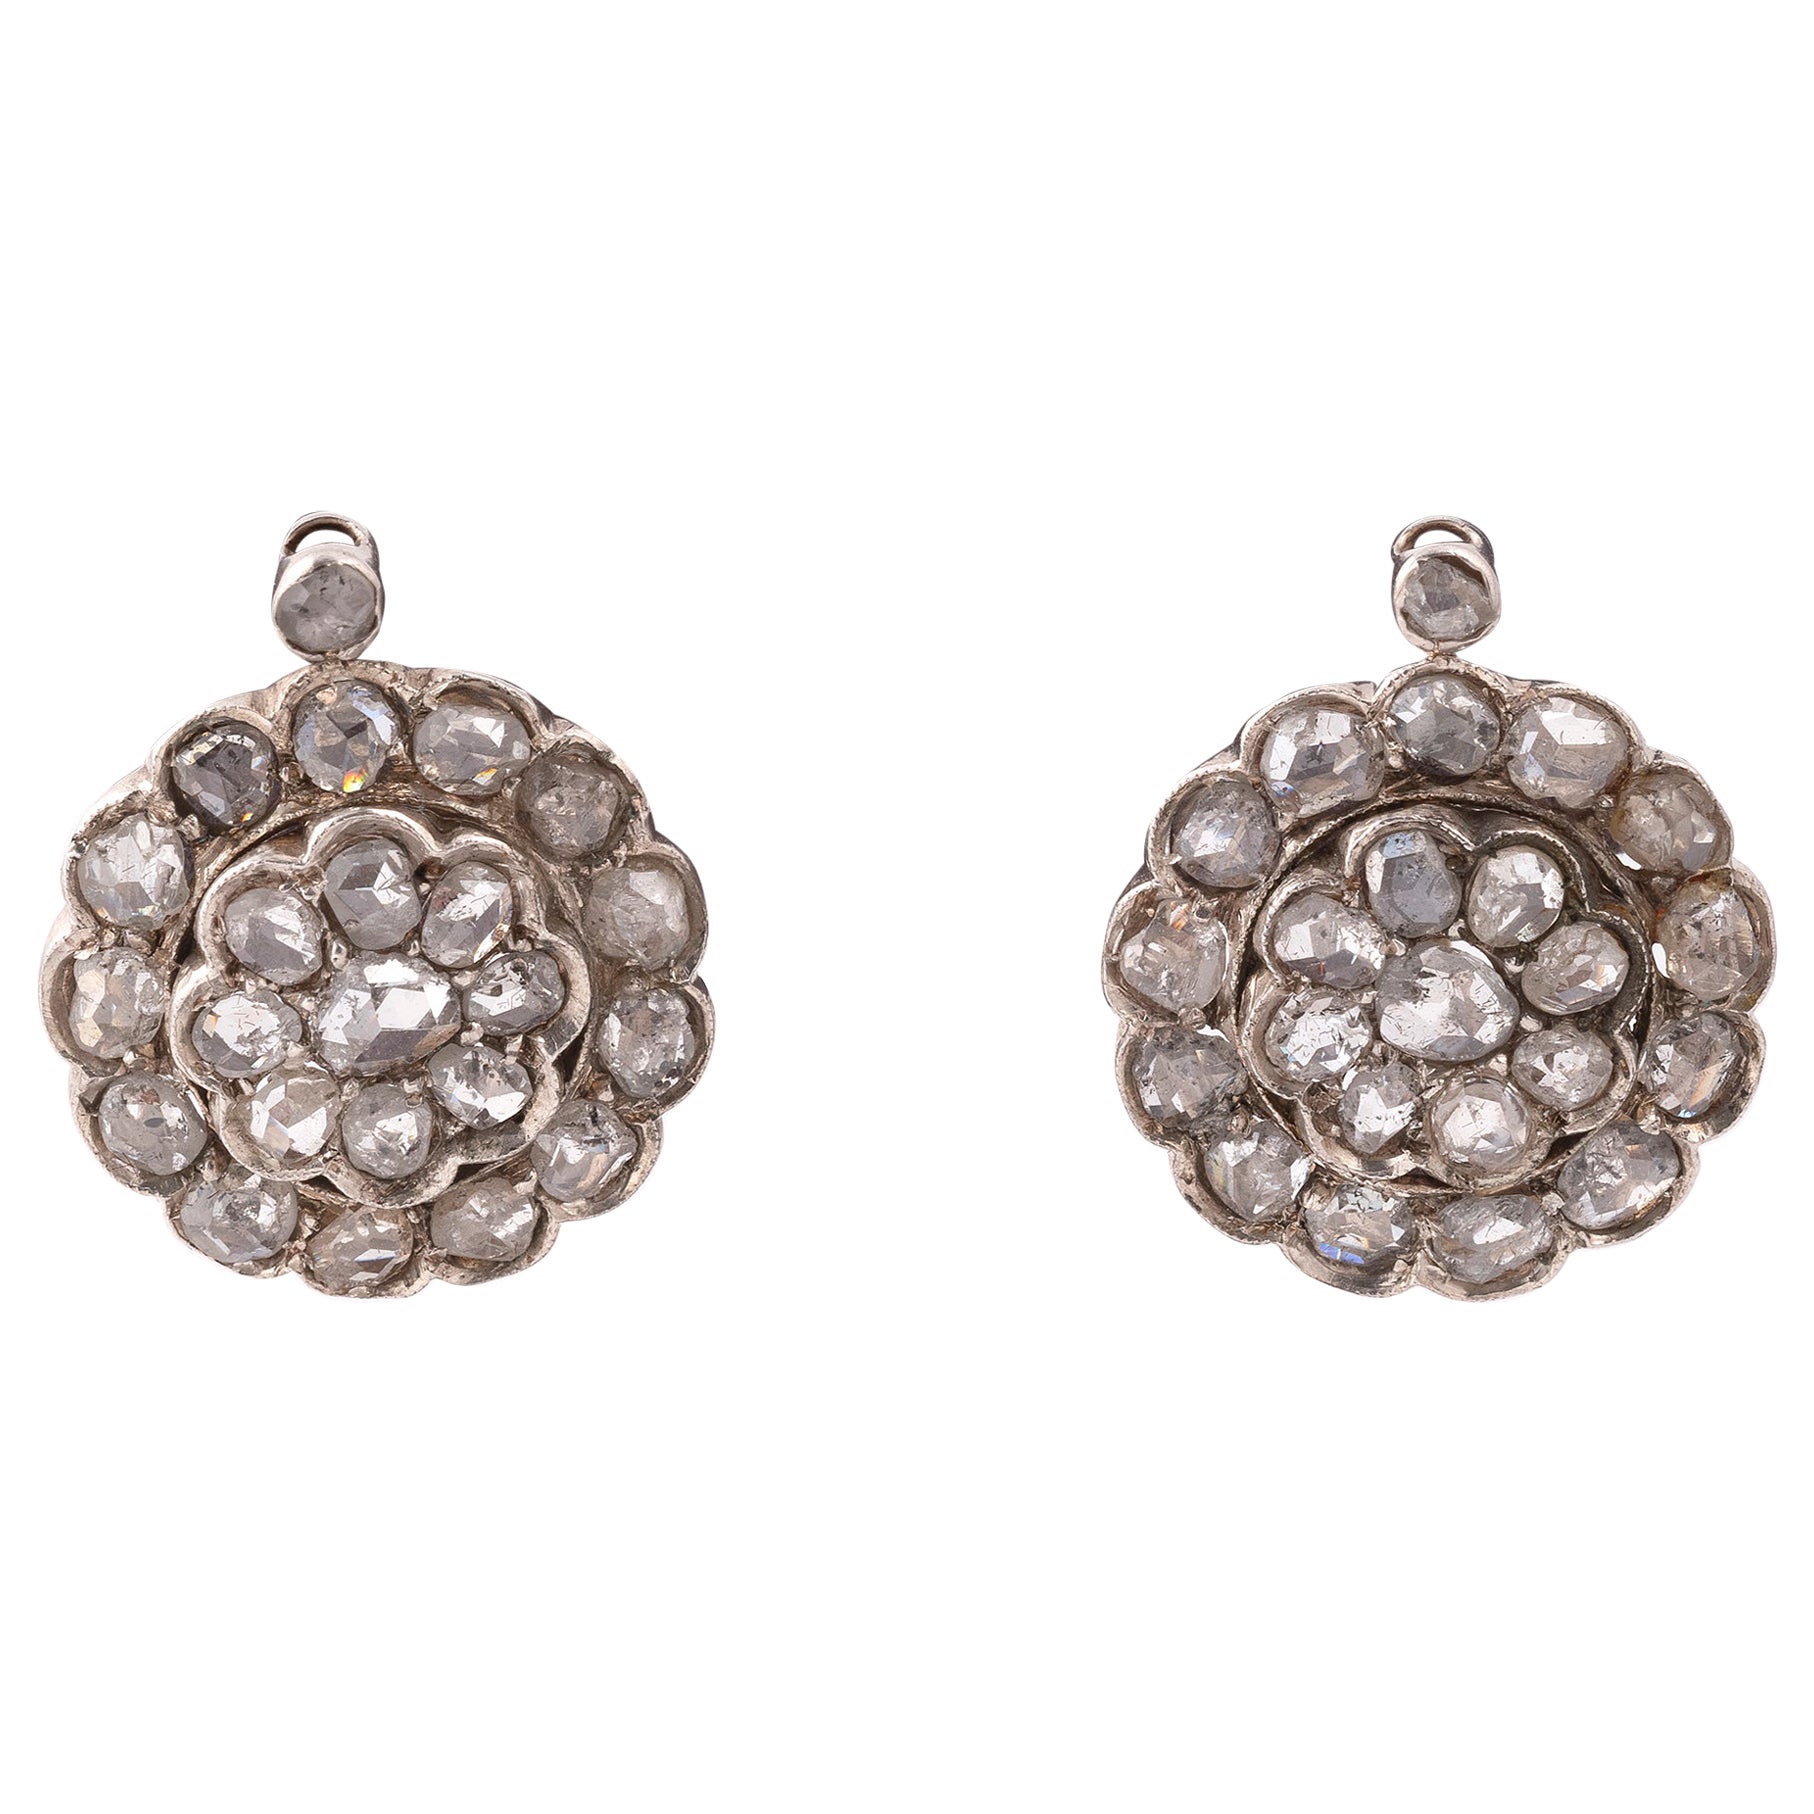 A Pair Of Diamond Cluster Earrings For Sale